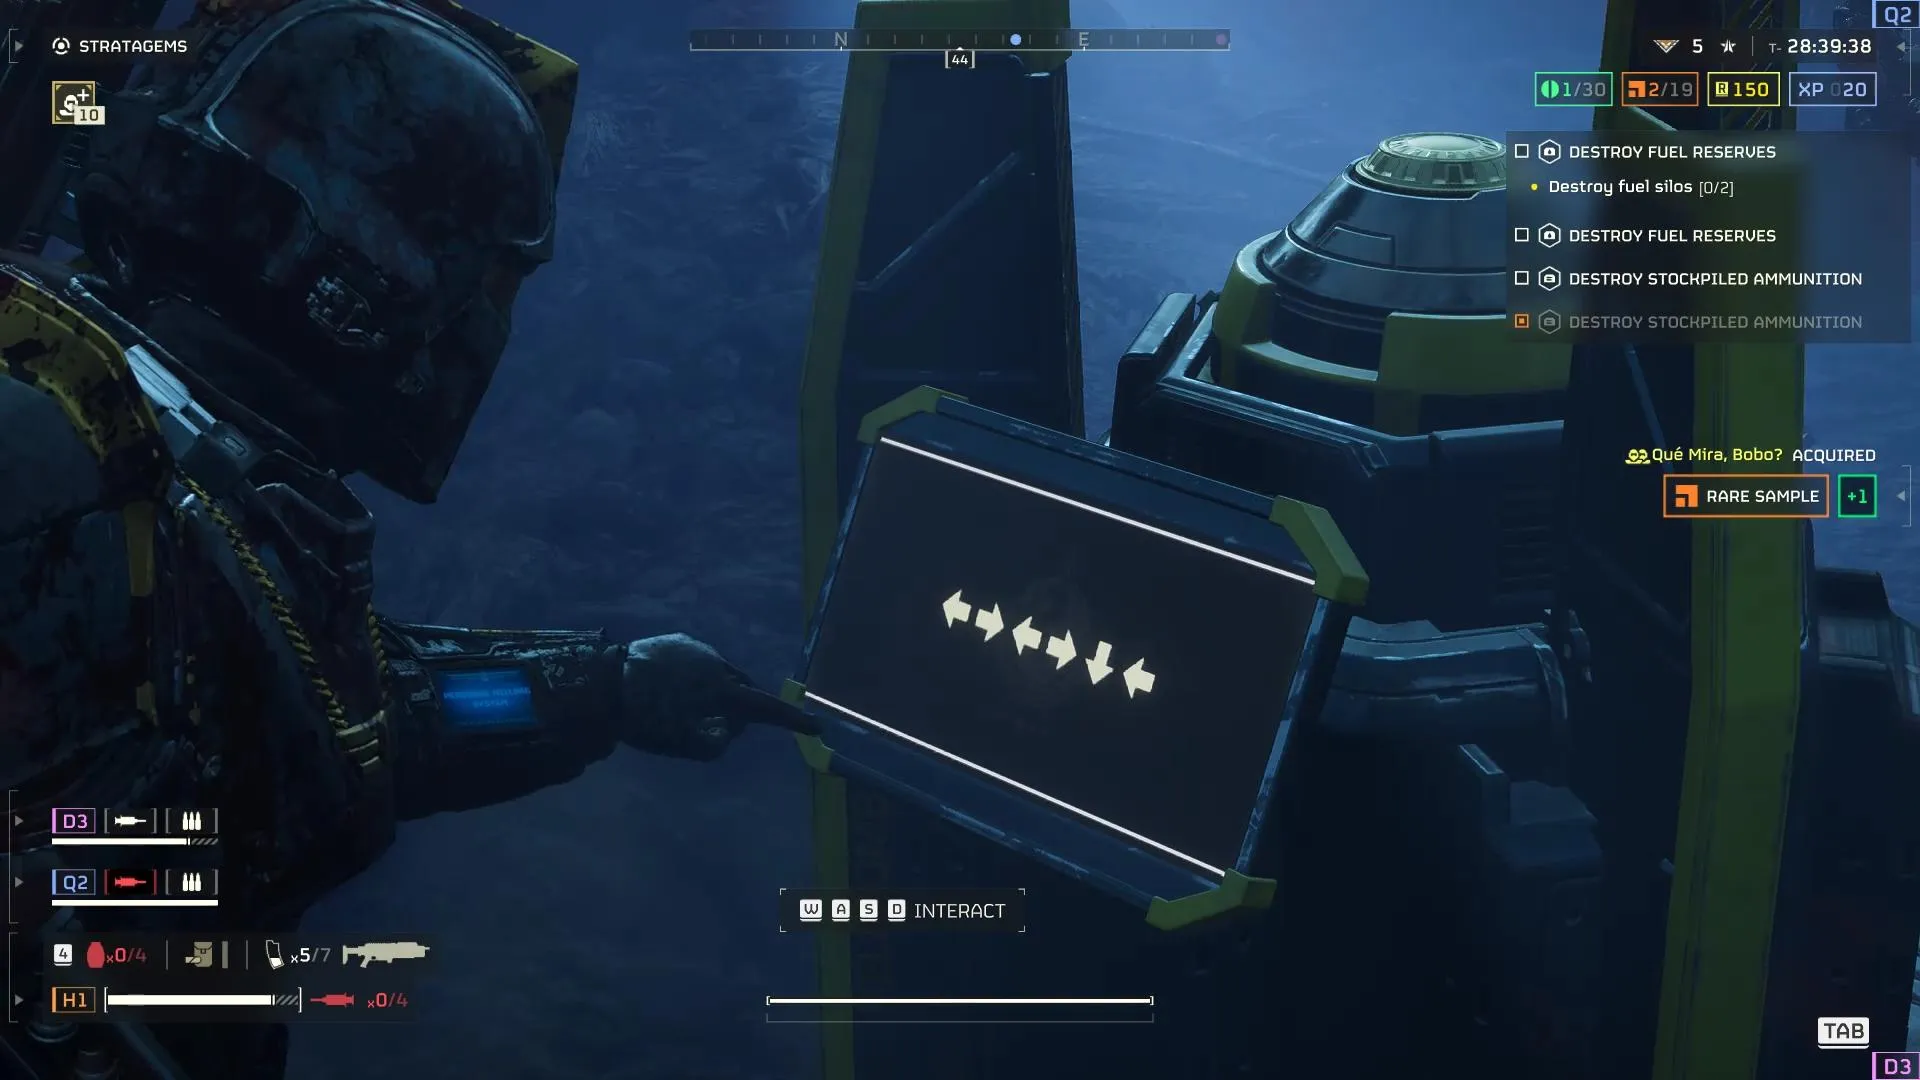 How To Destroy Fuel Reserves and Ammunition Stockpiles in Helldivers 2